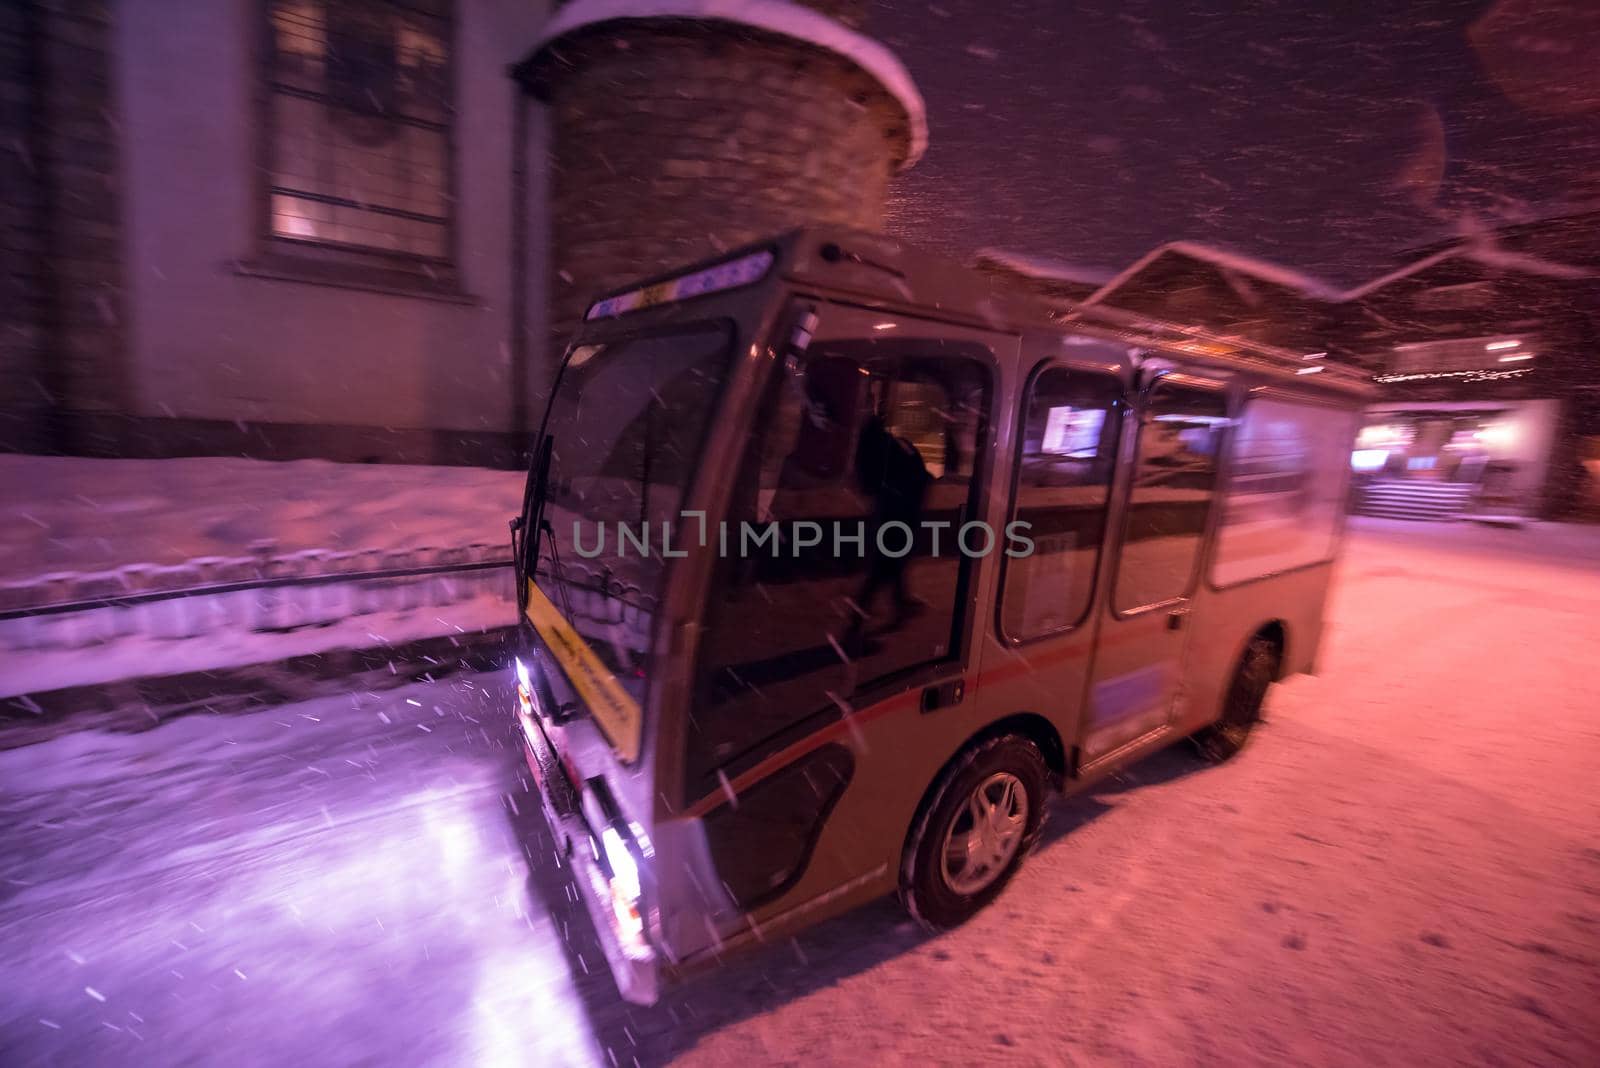 Electric taxi bus on snowy streets in the car-free Alpine mountain village at cold winter night